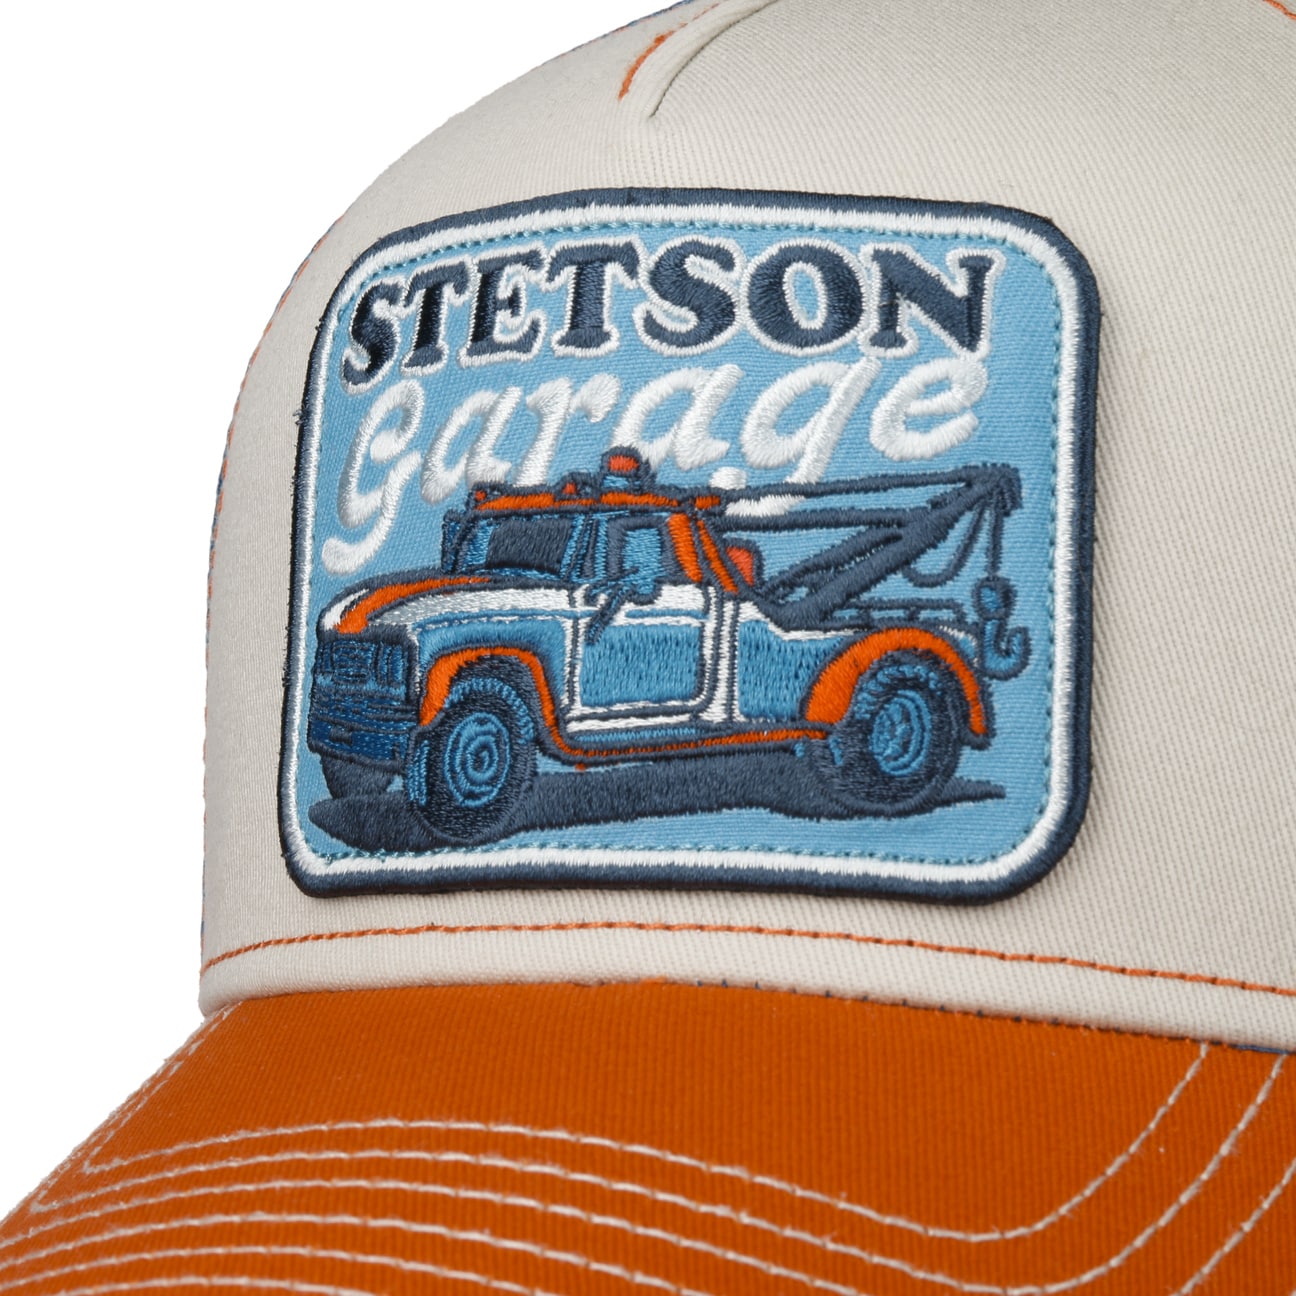 By The Campfire Trucker Cap by Stetson - 49,00 €